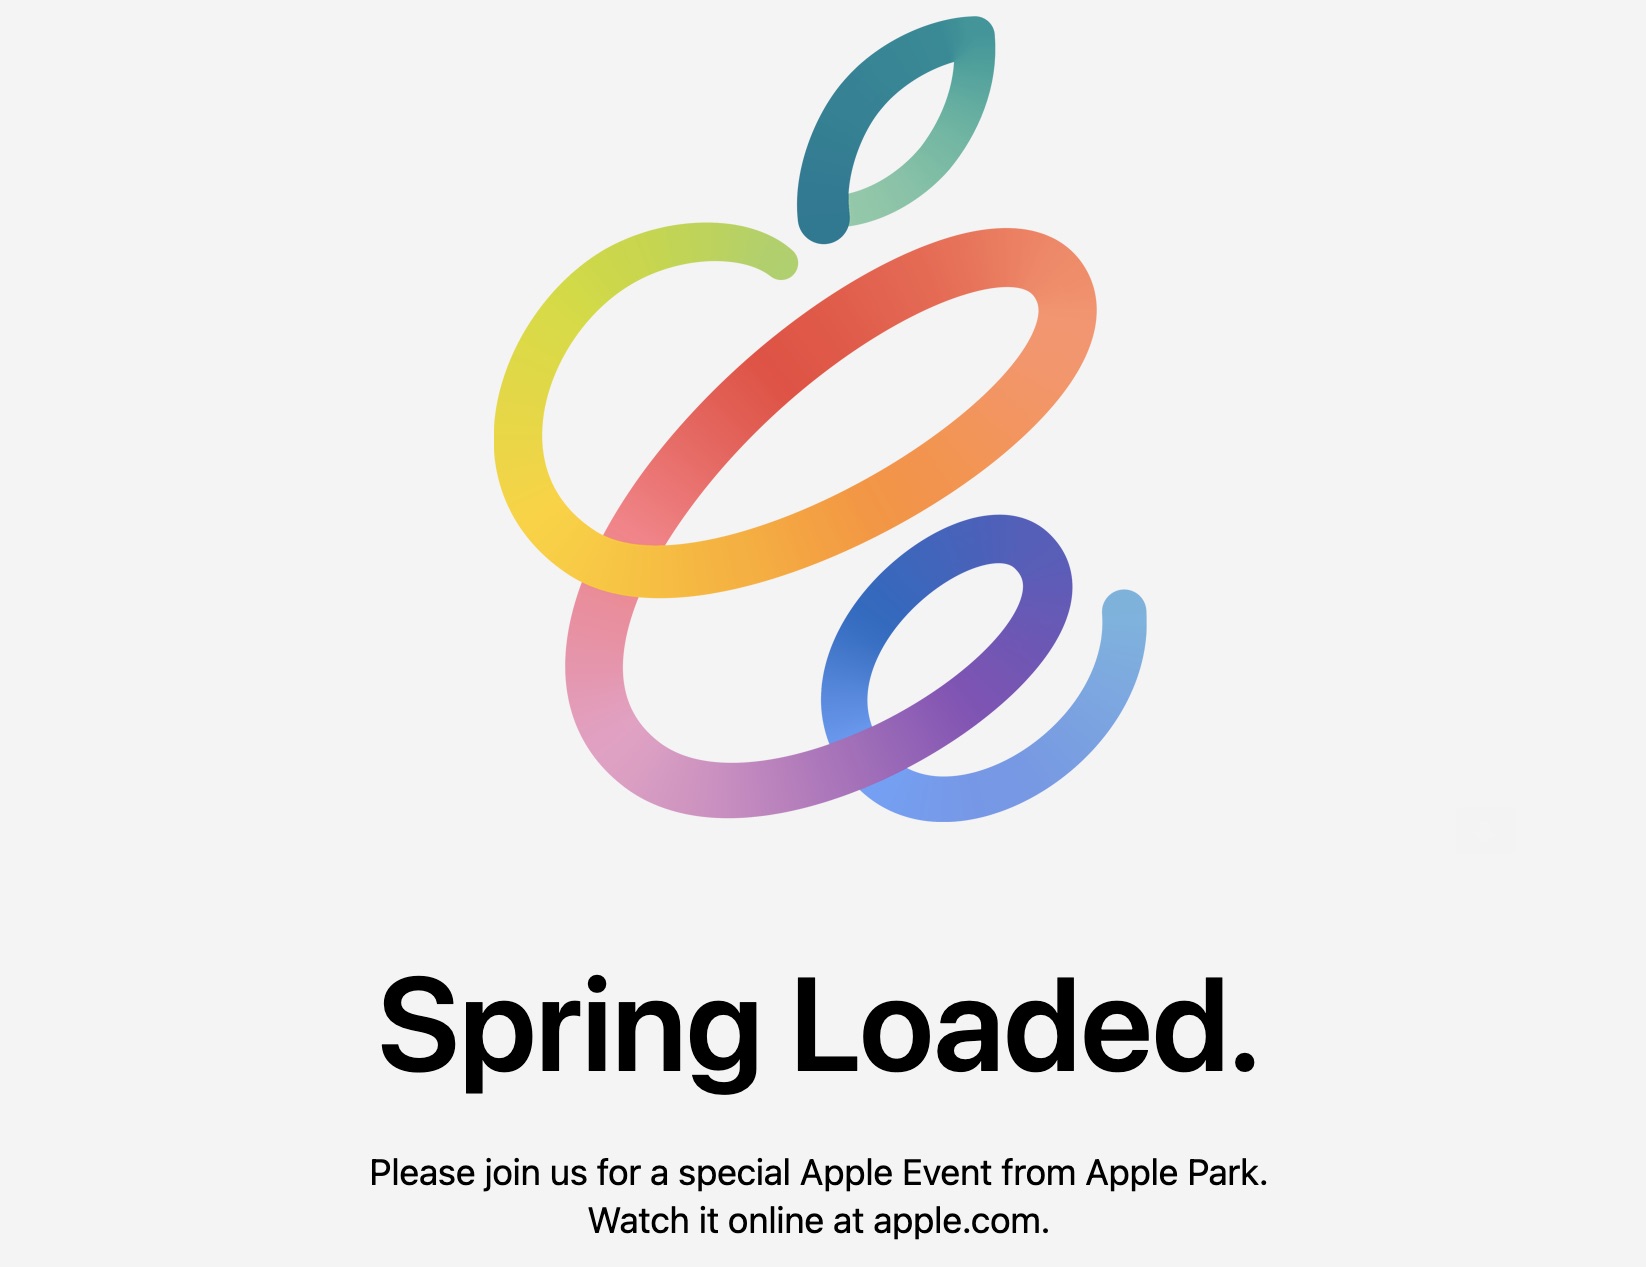 Apple's 'Spring Loaded' Event Officially Announced for Tuesday, April